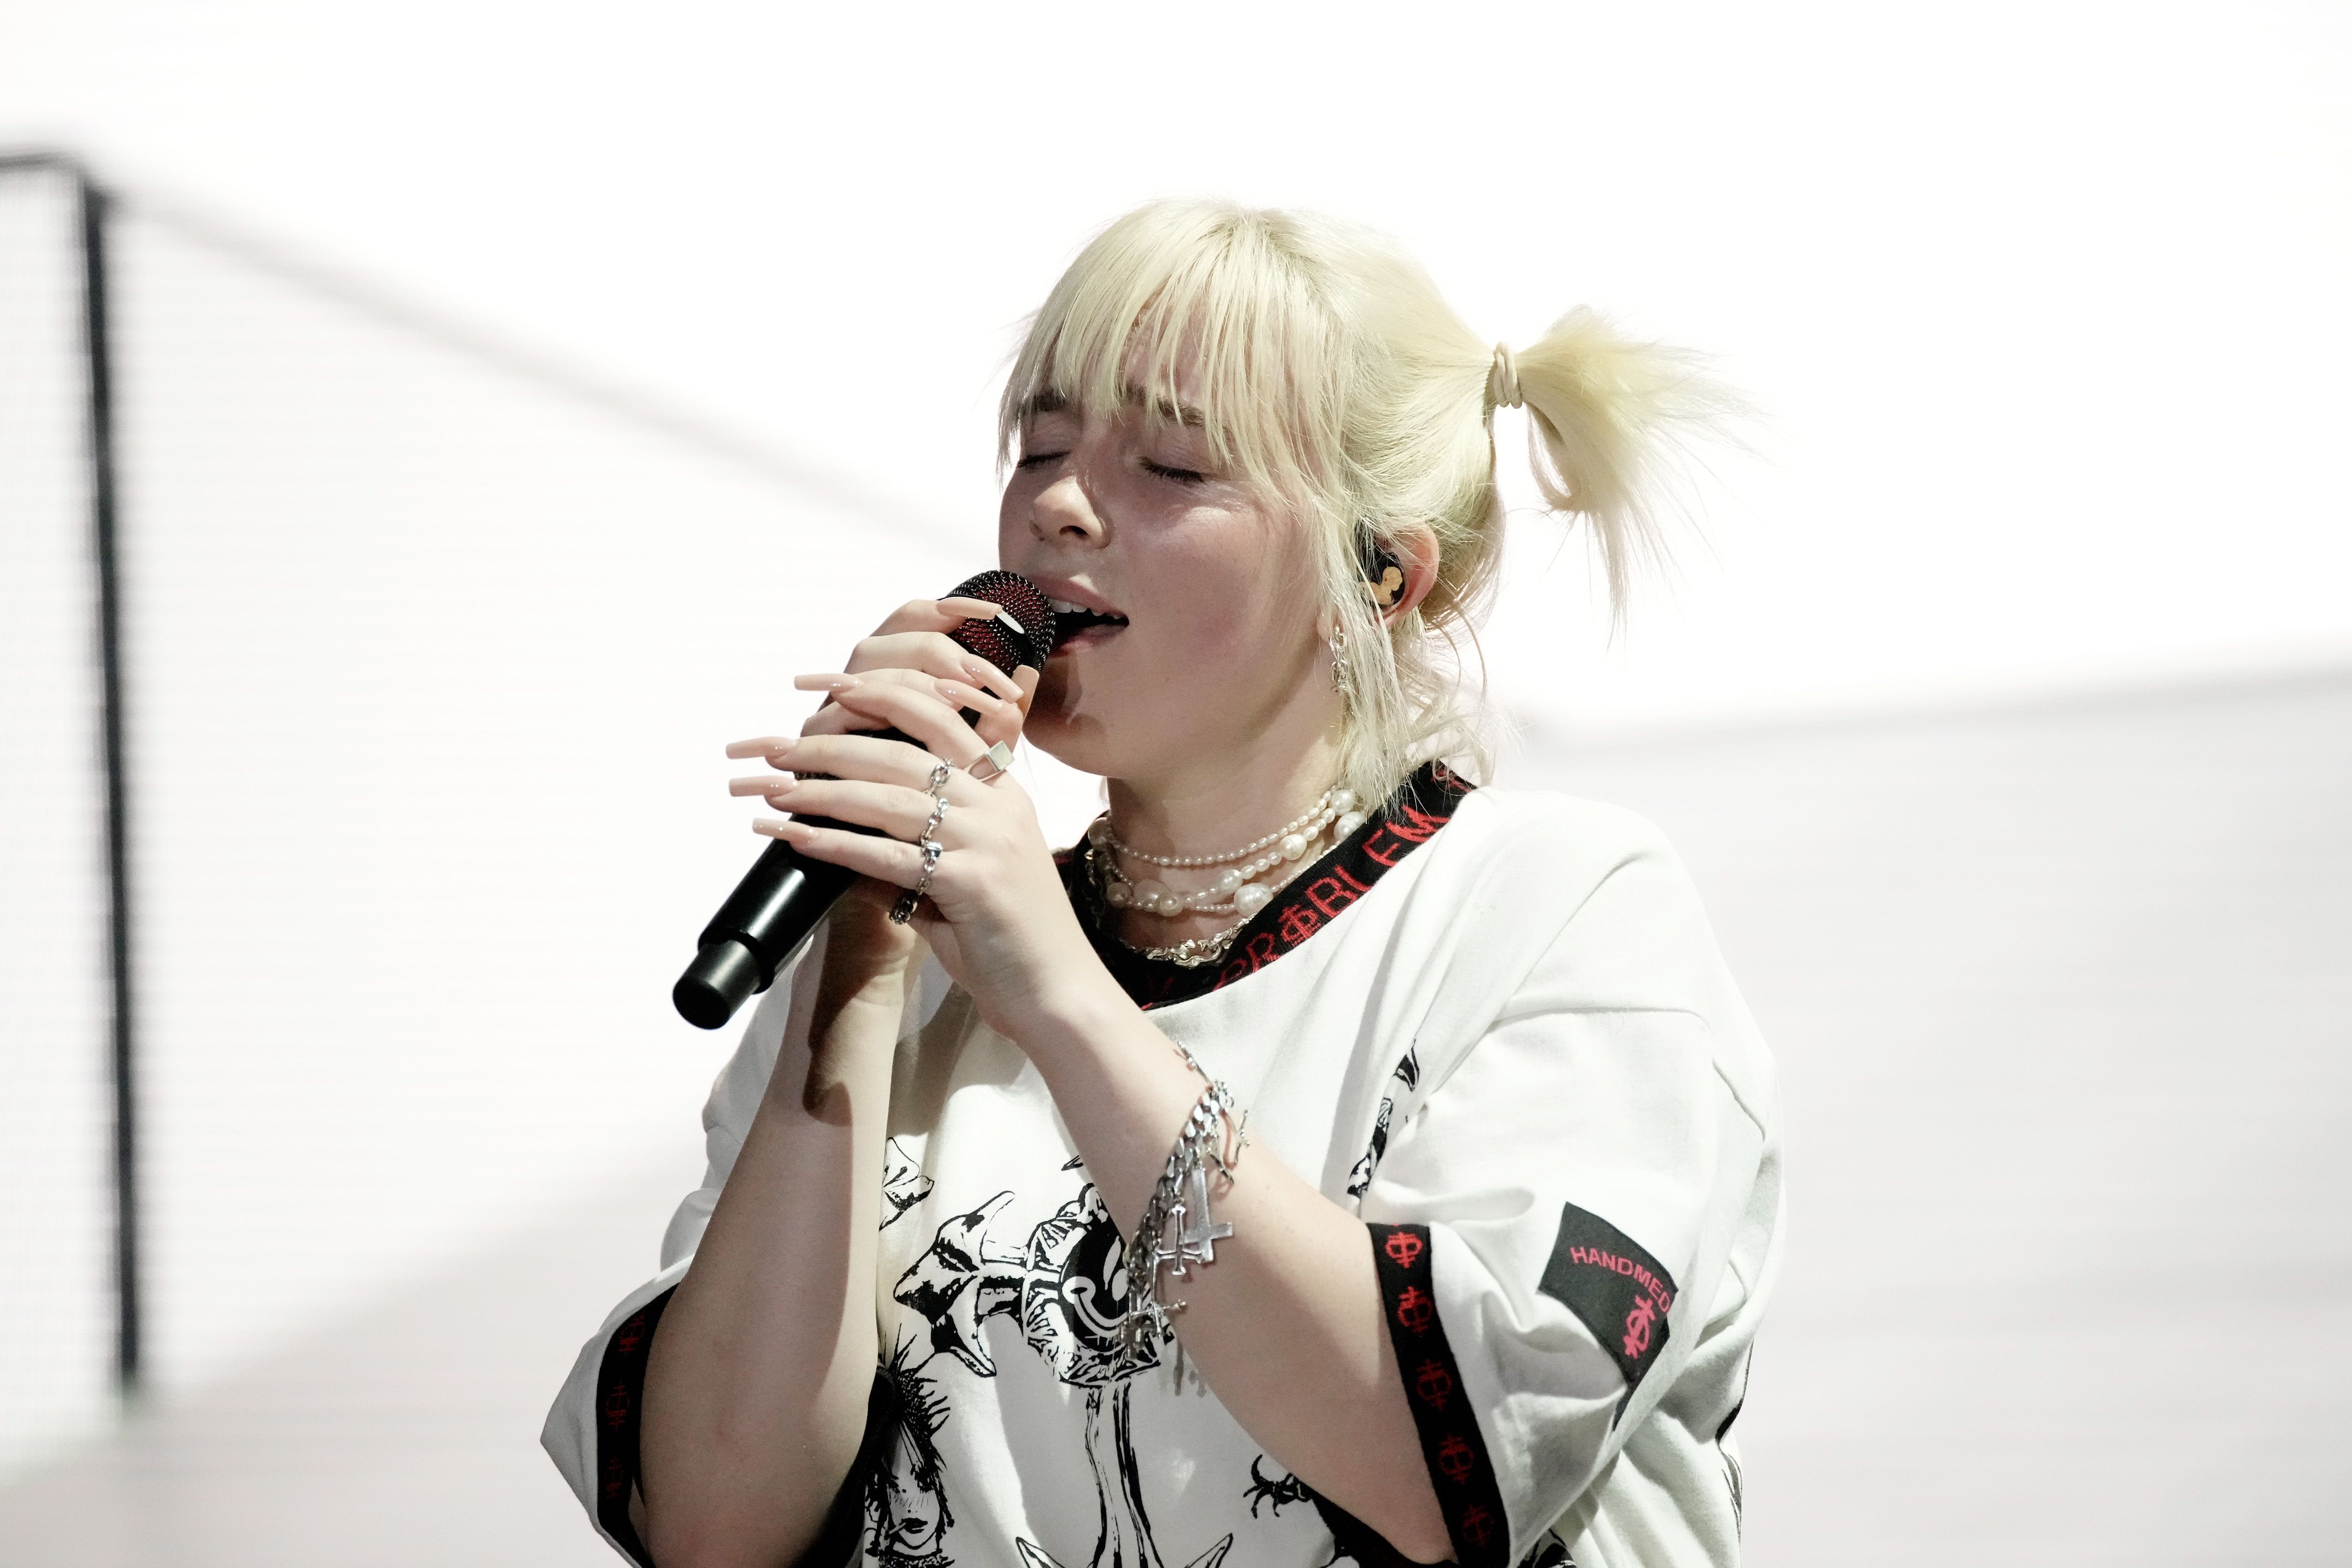 'Happier Than Ever' artist Billie Eilish performs onstage during the 2021 Life Is Beautiful Music & Festival on September 19 2021 in Las Vegas, Nevada.